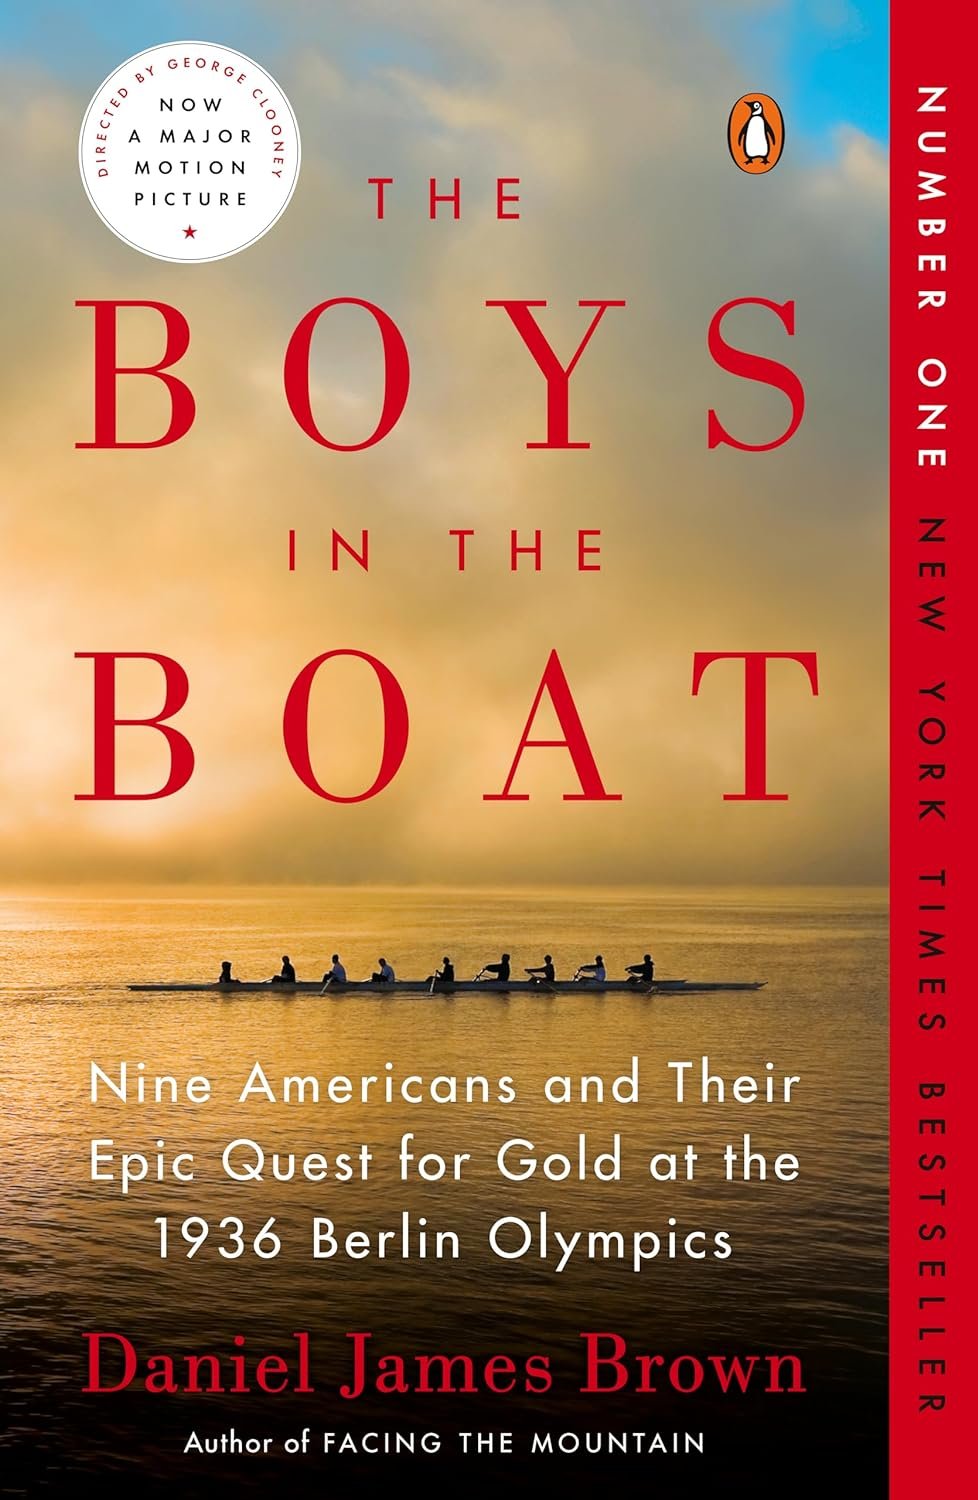 The Boys in the Boat: Nine Americans and Their Epic Quest for Gold at the 1936 Berlin Olympics     Paperback – January 1, 2014